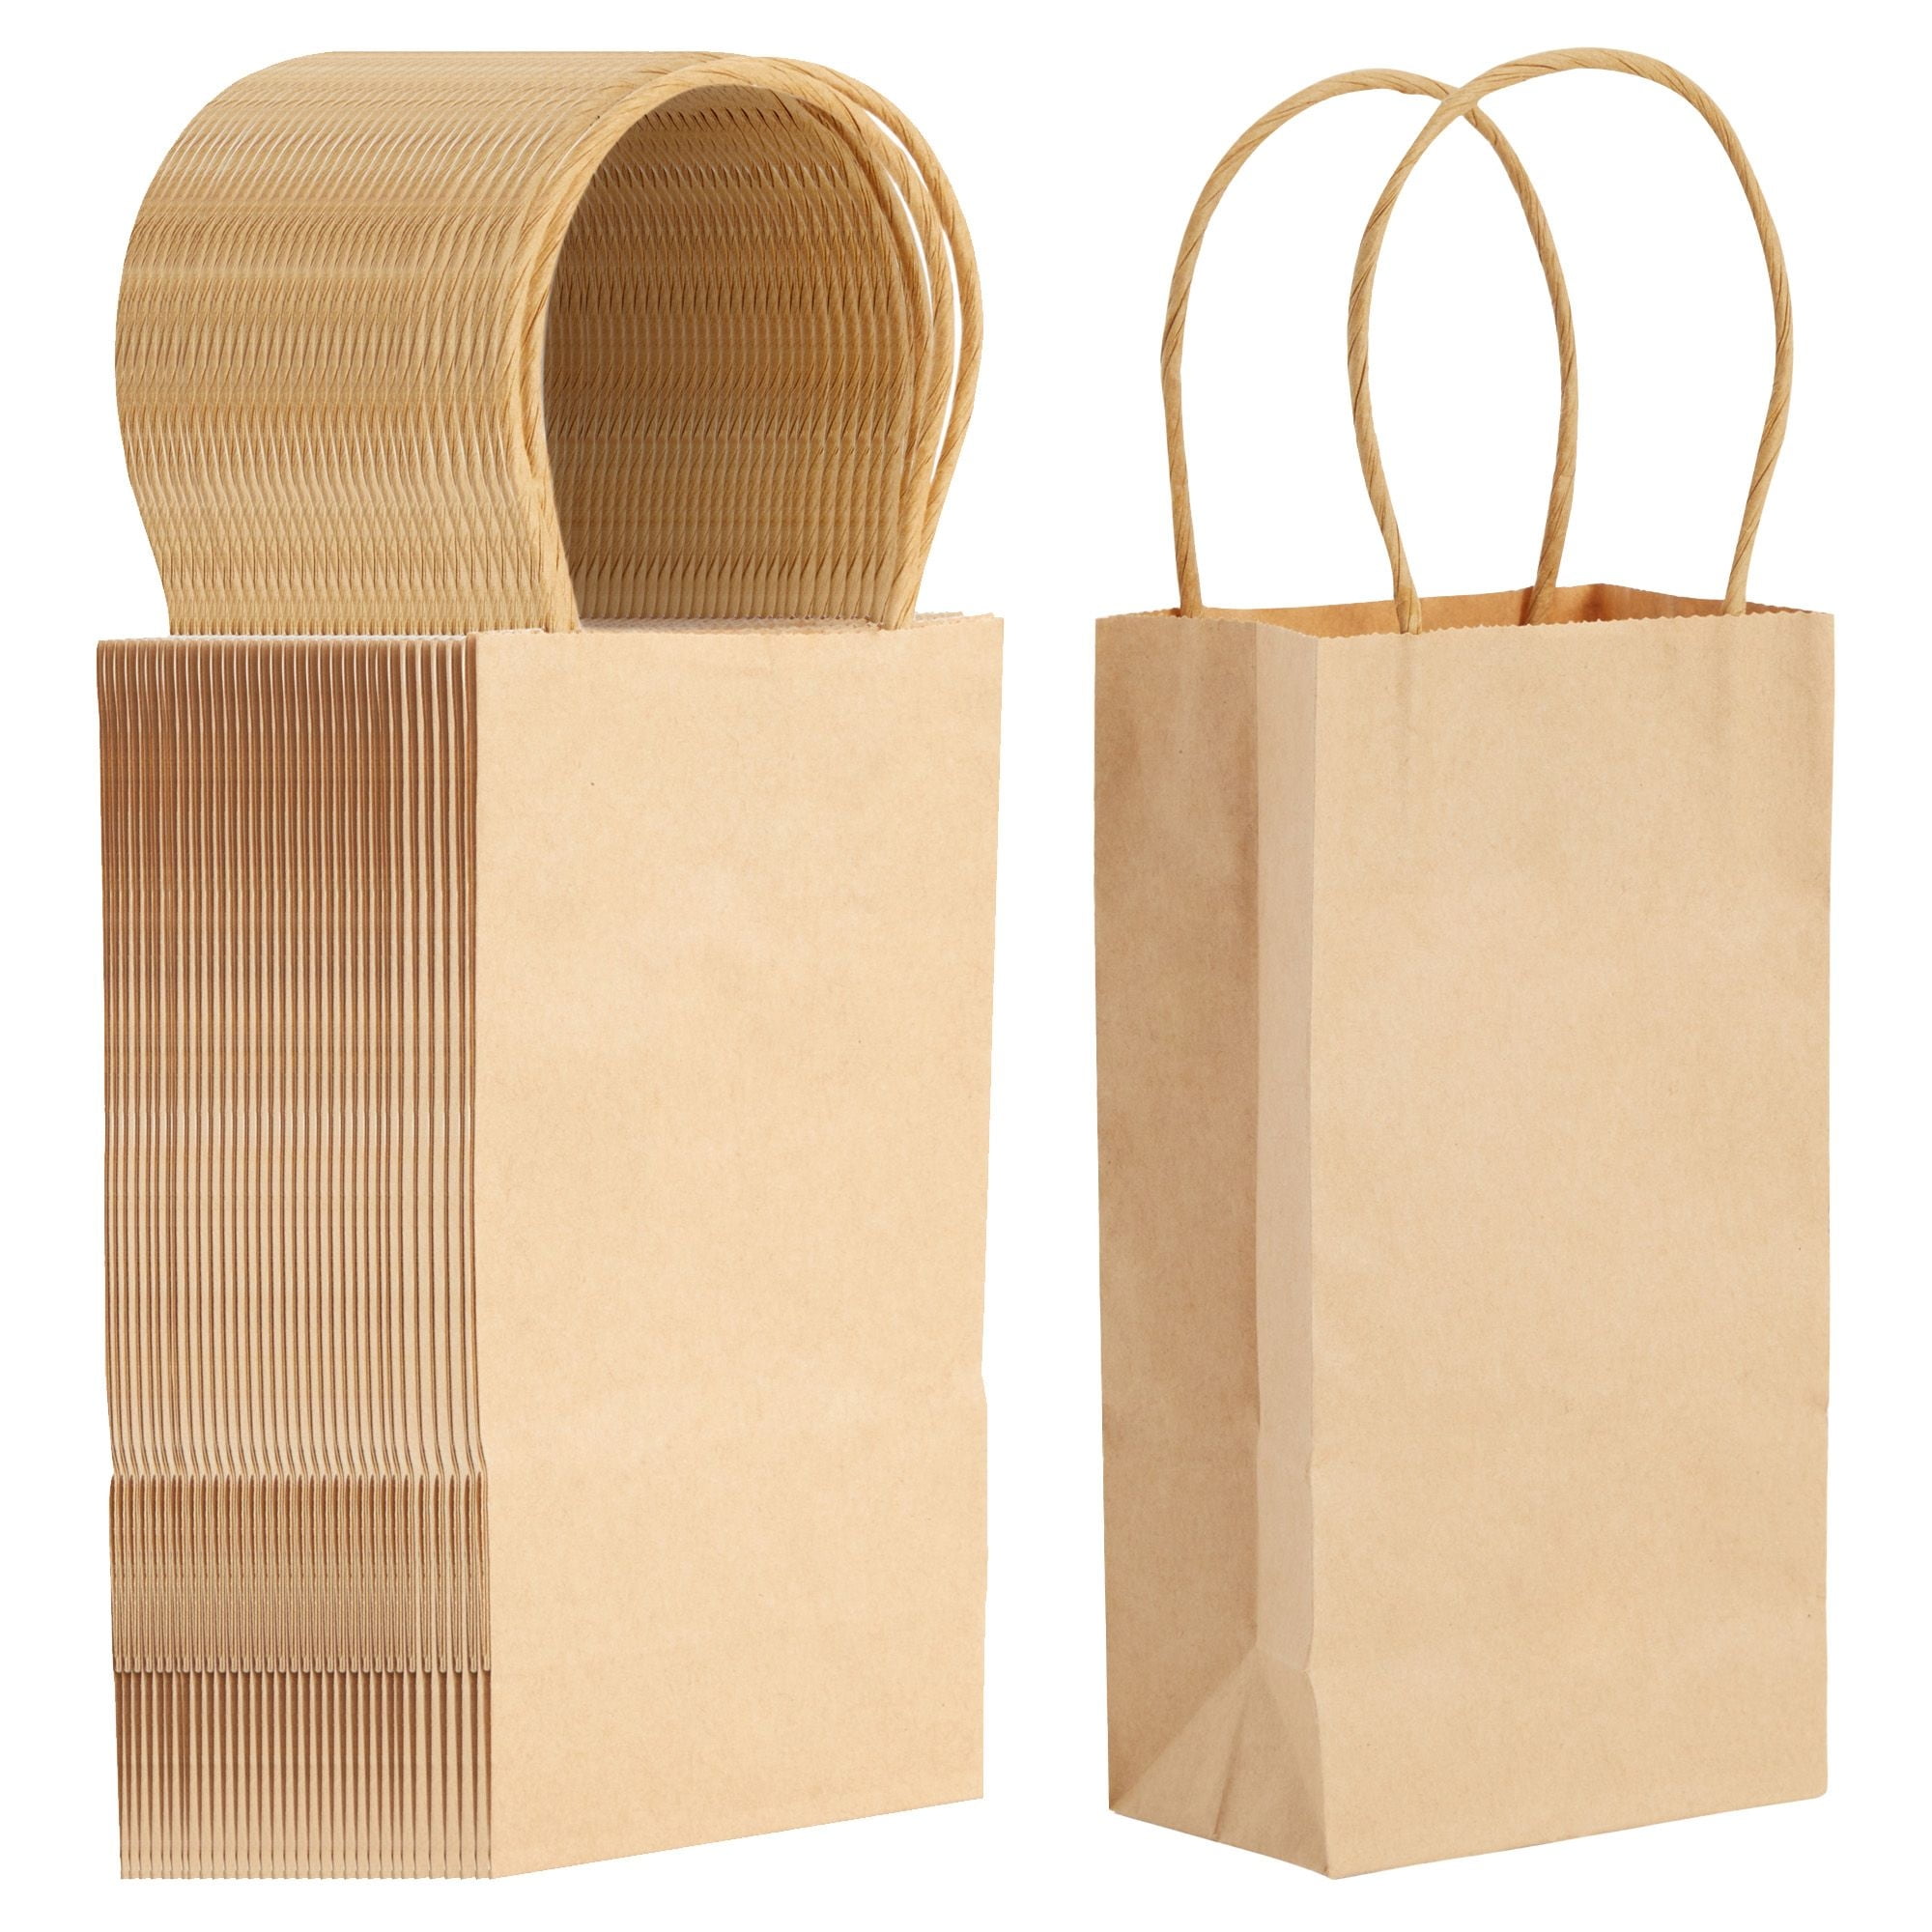 Kraft Color Paper Bags With Handles - 10x8x4